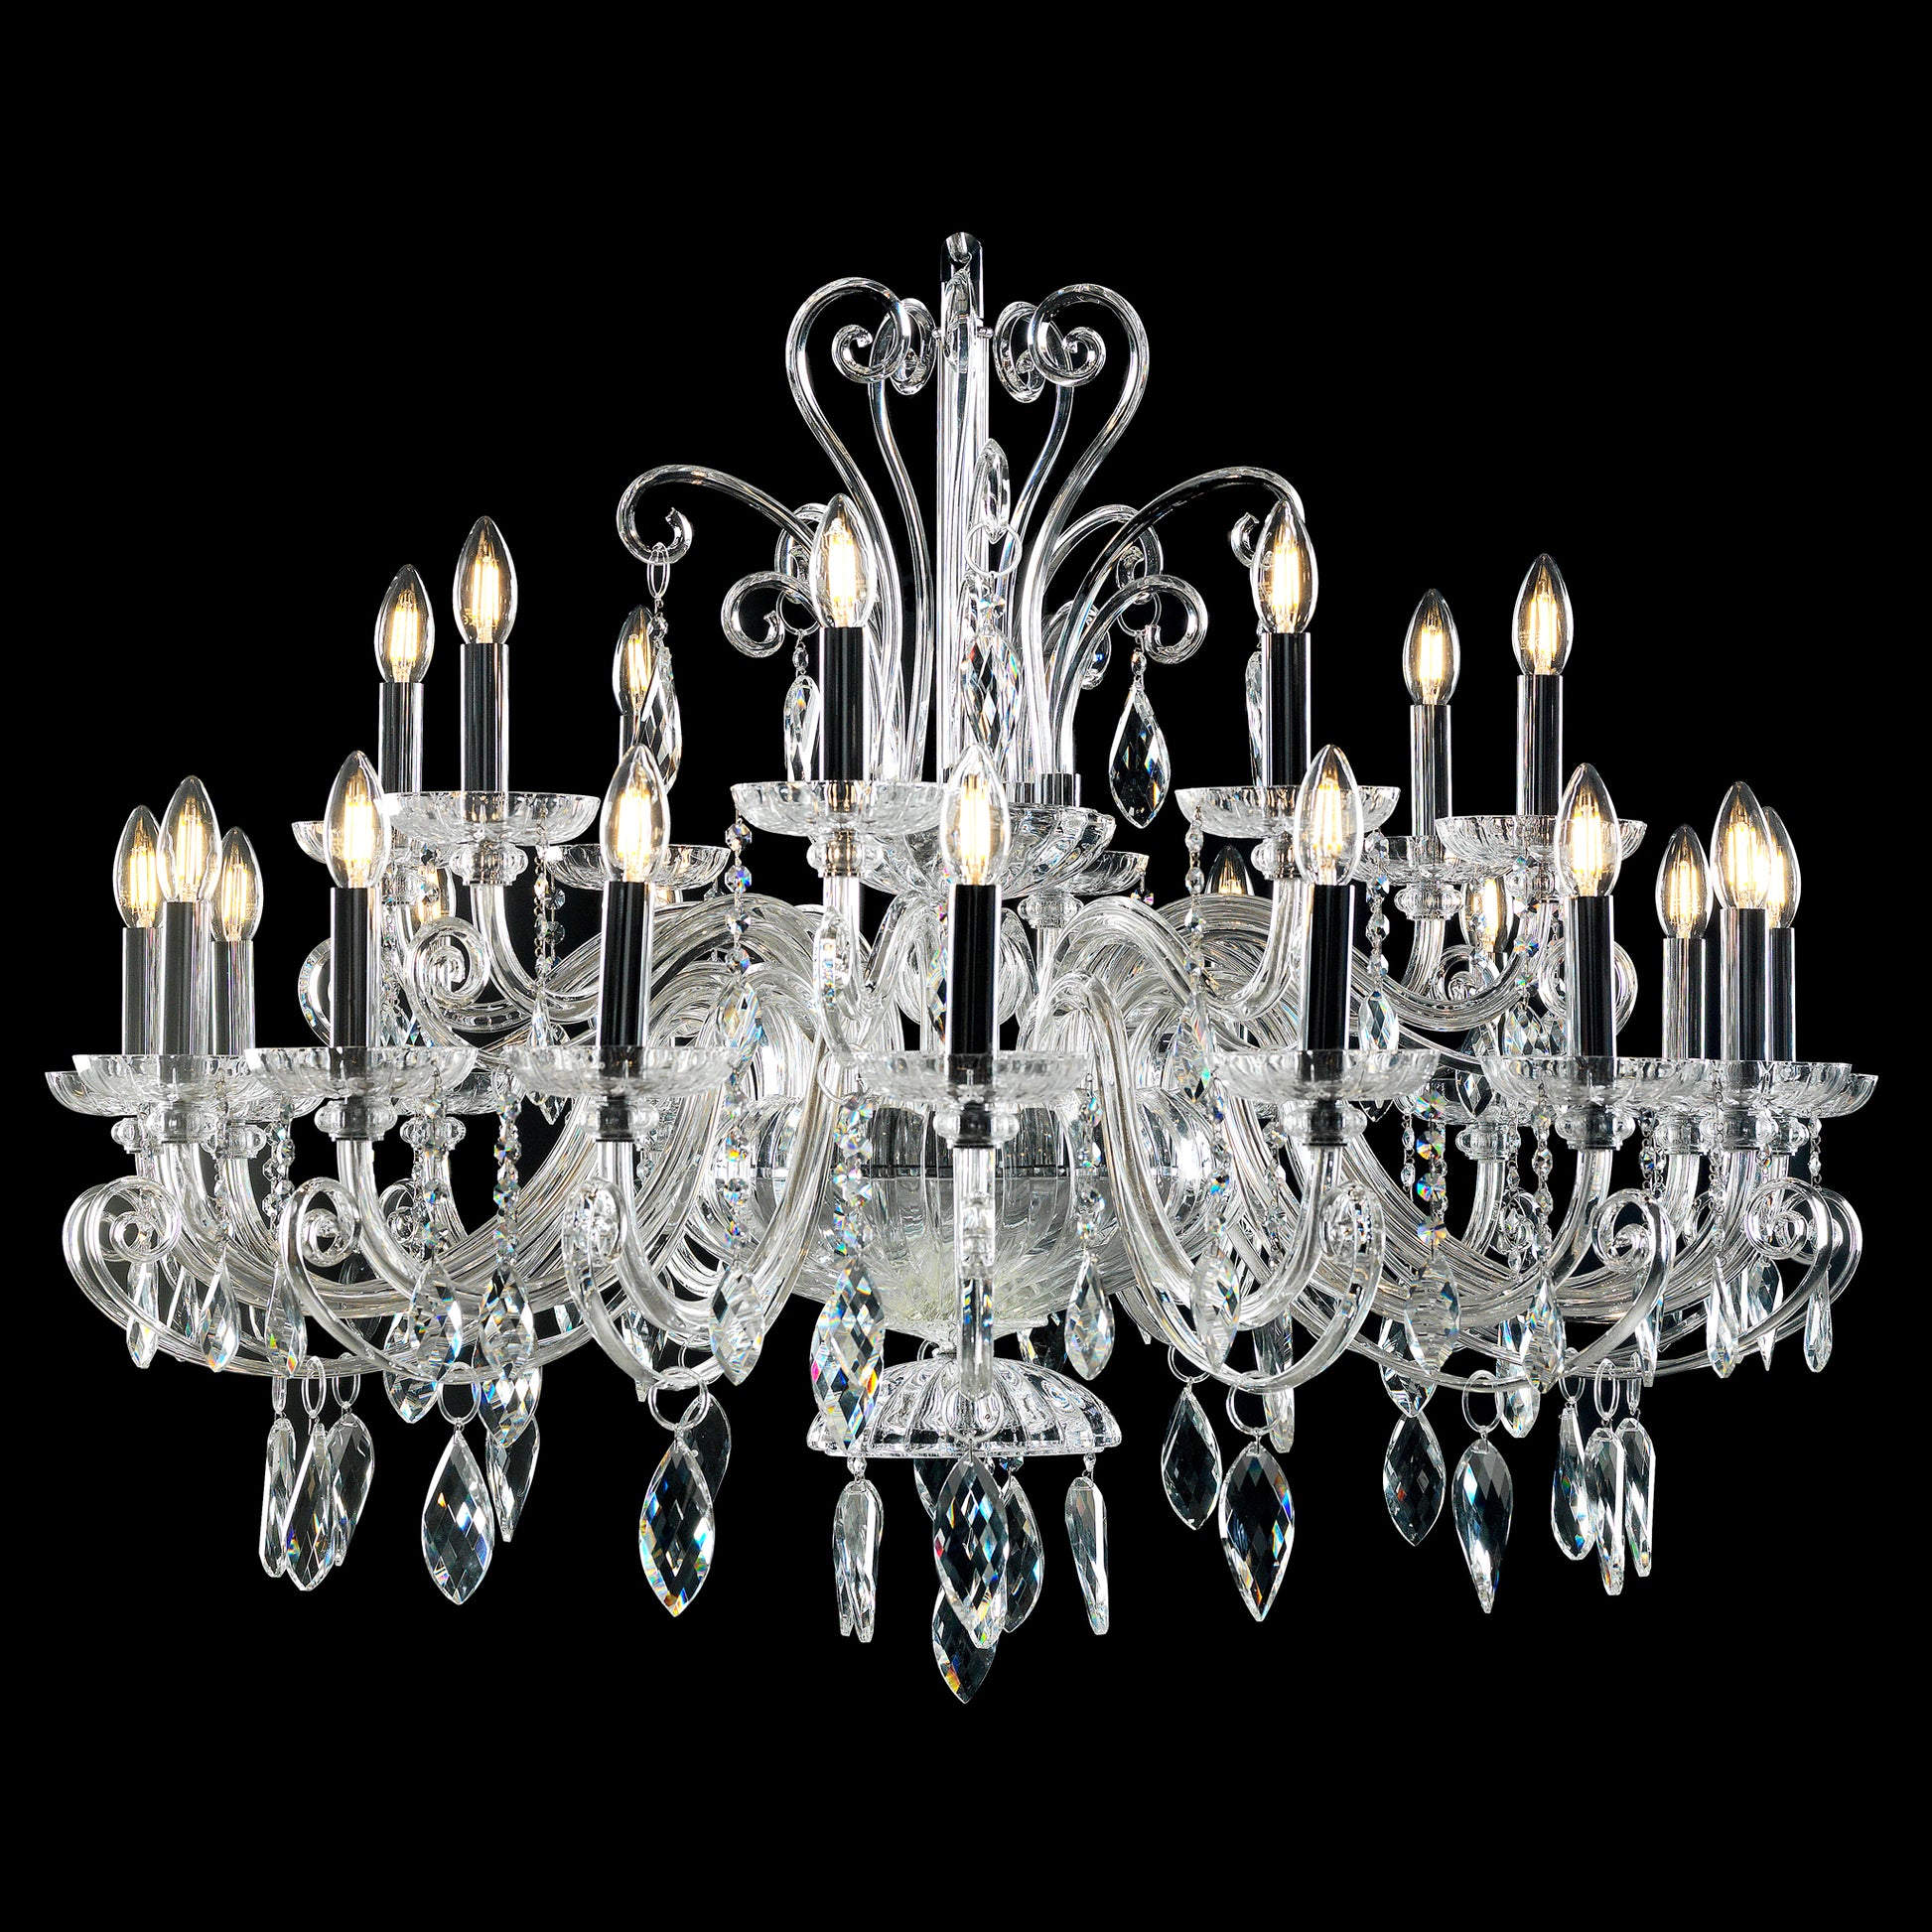 Ely Crystal Chandelier - IONS DESIGN